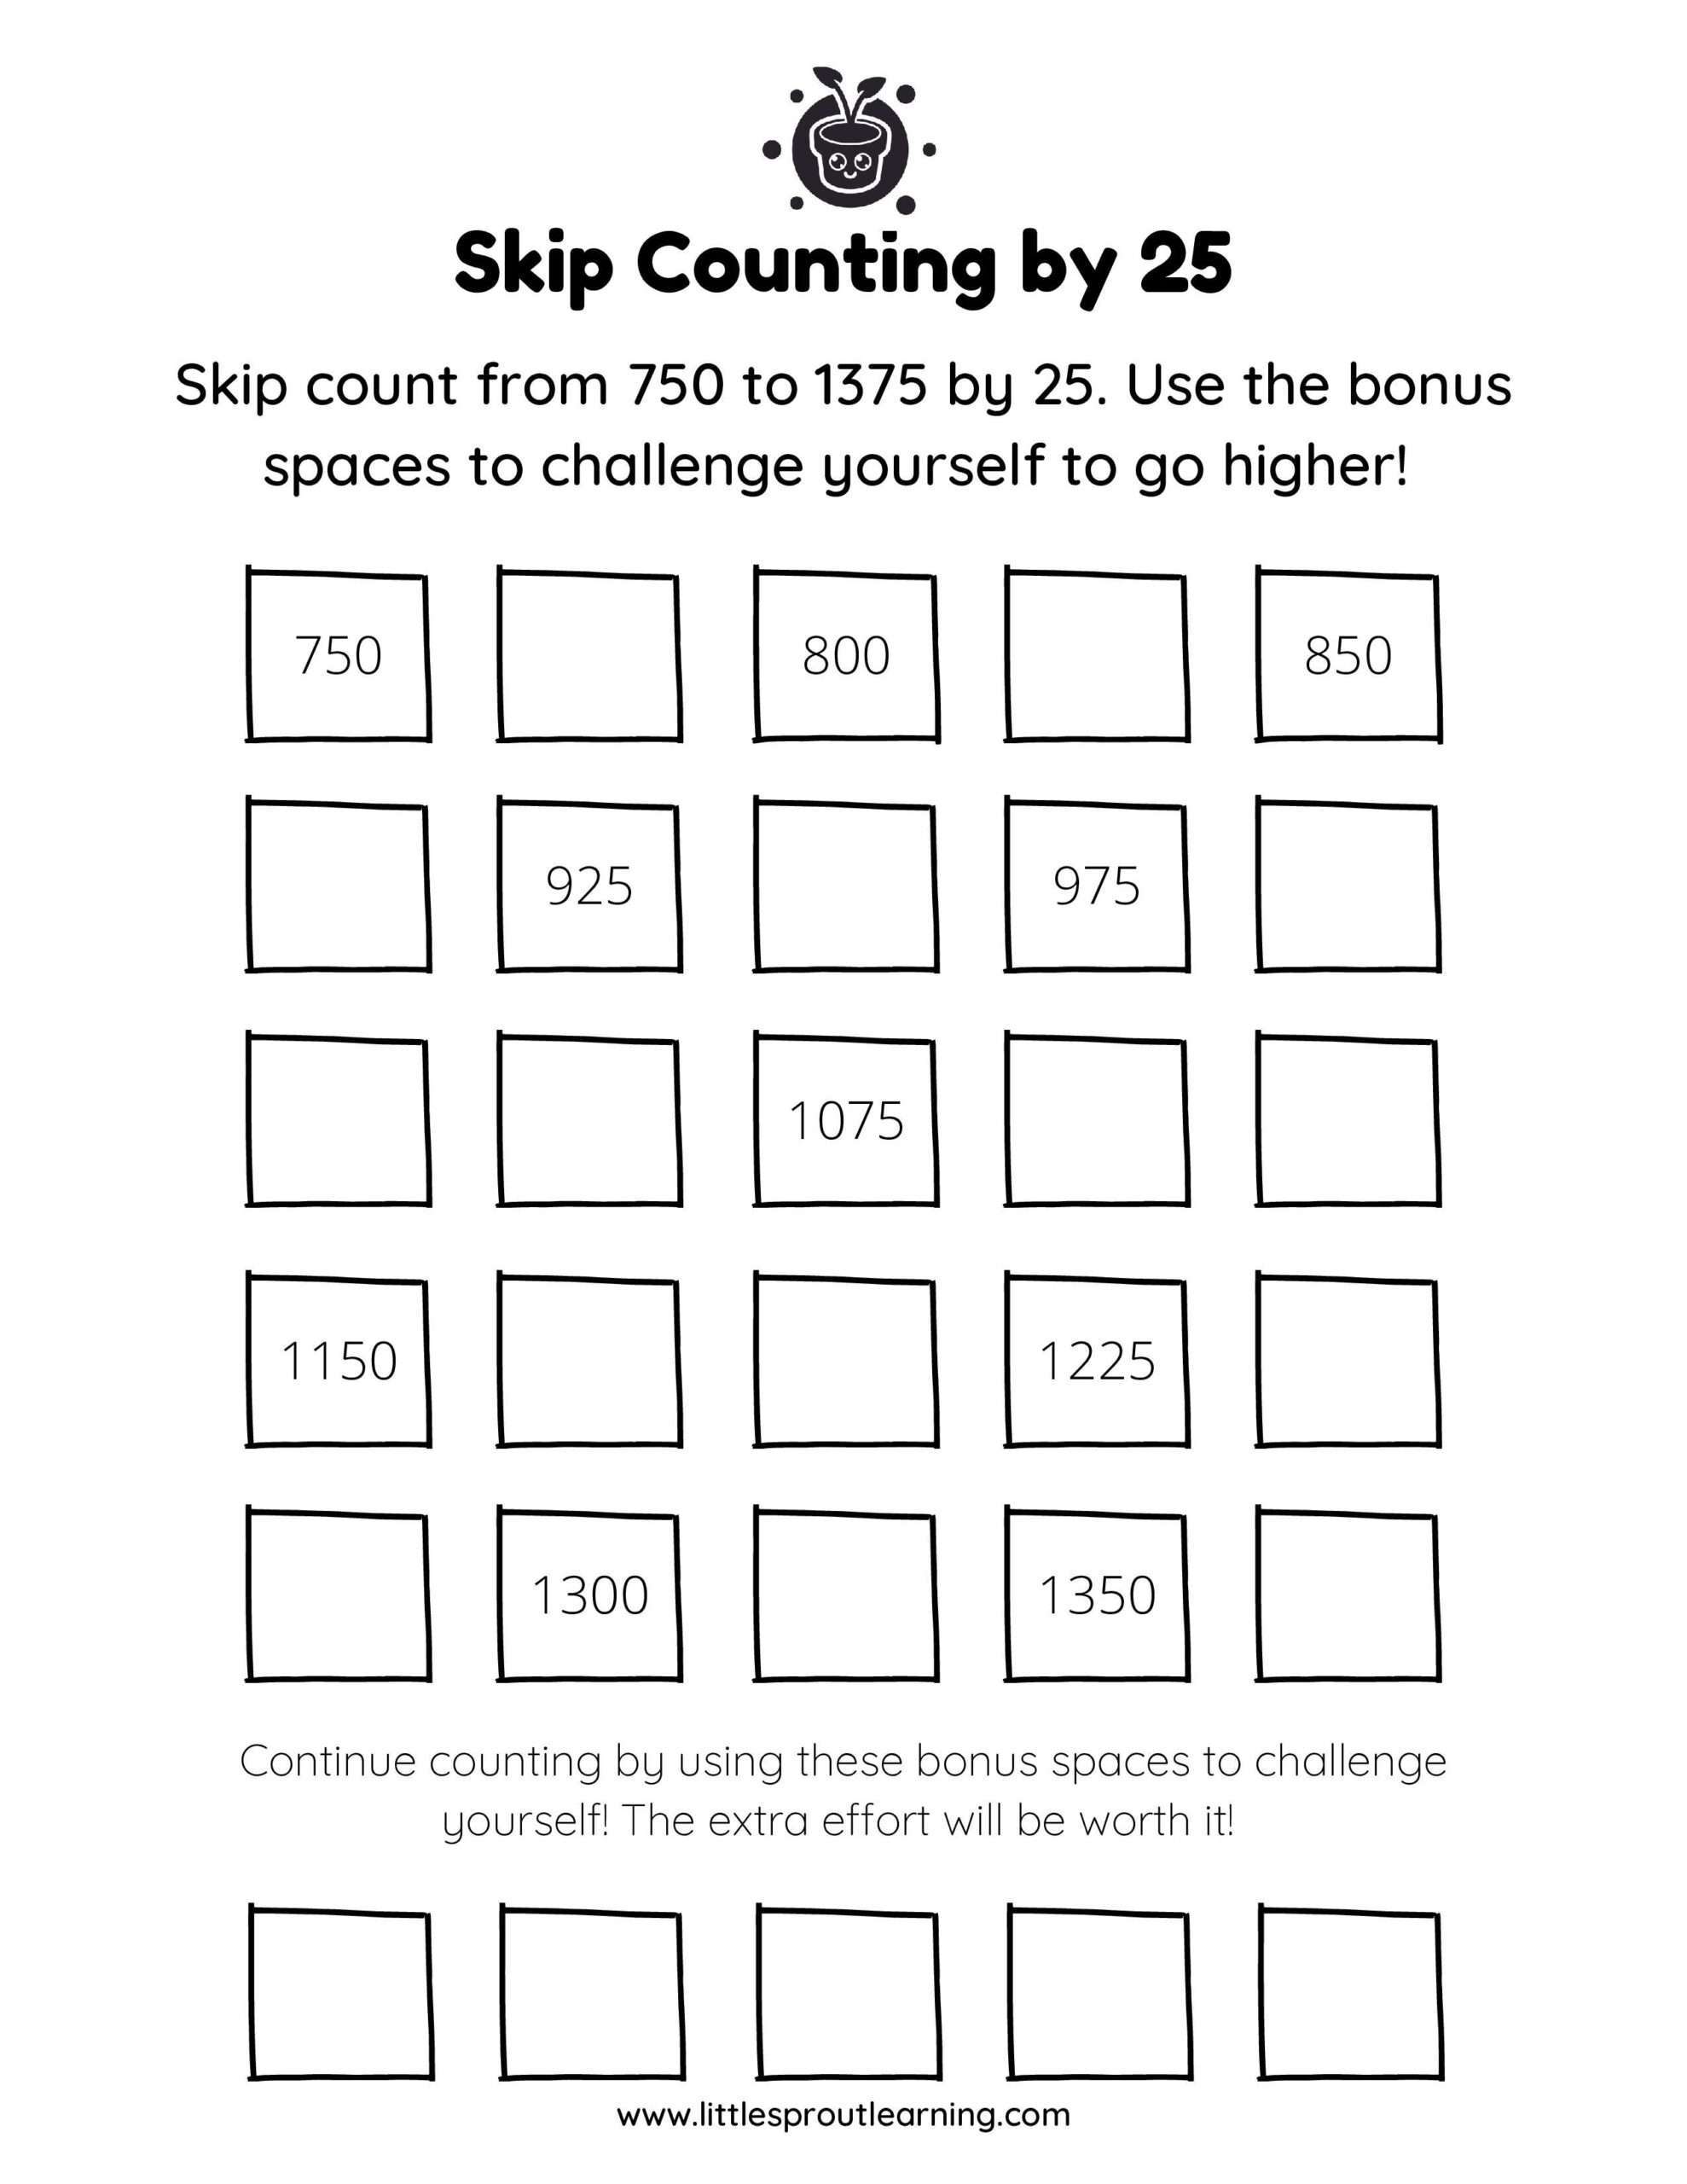 Grade 3 Counting Practice Worksheet Skip Counting by 25 scaled